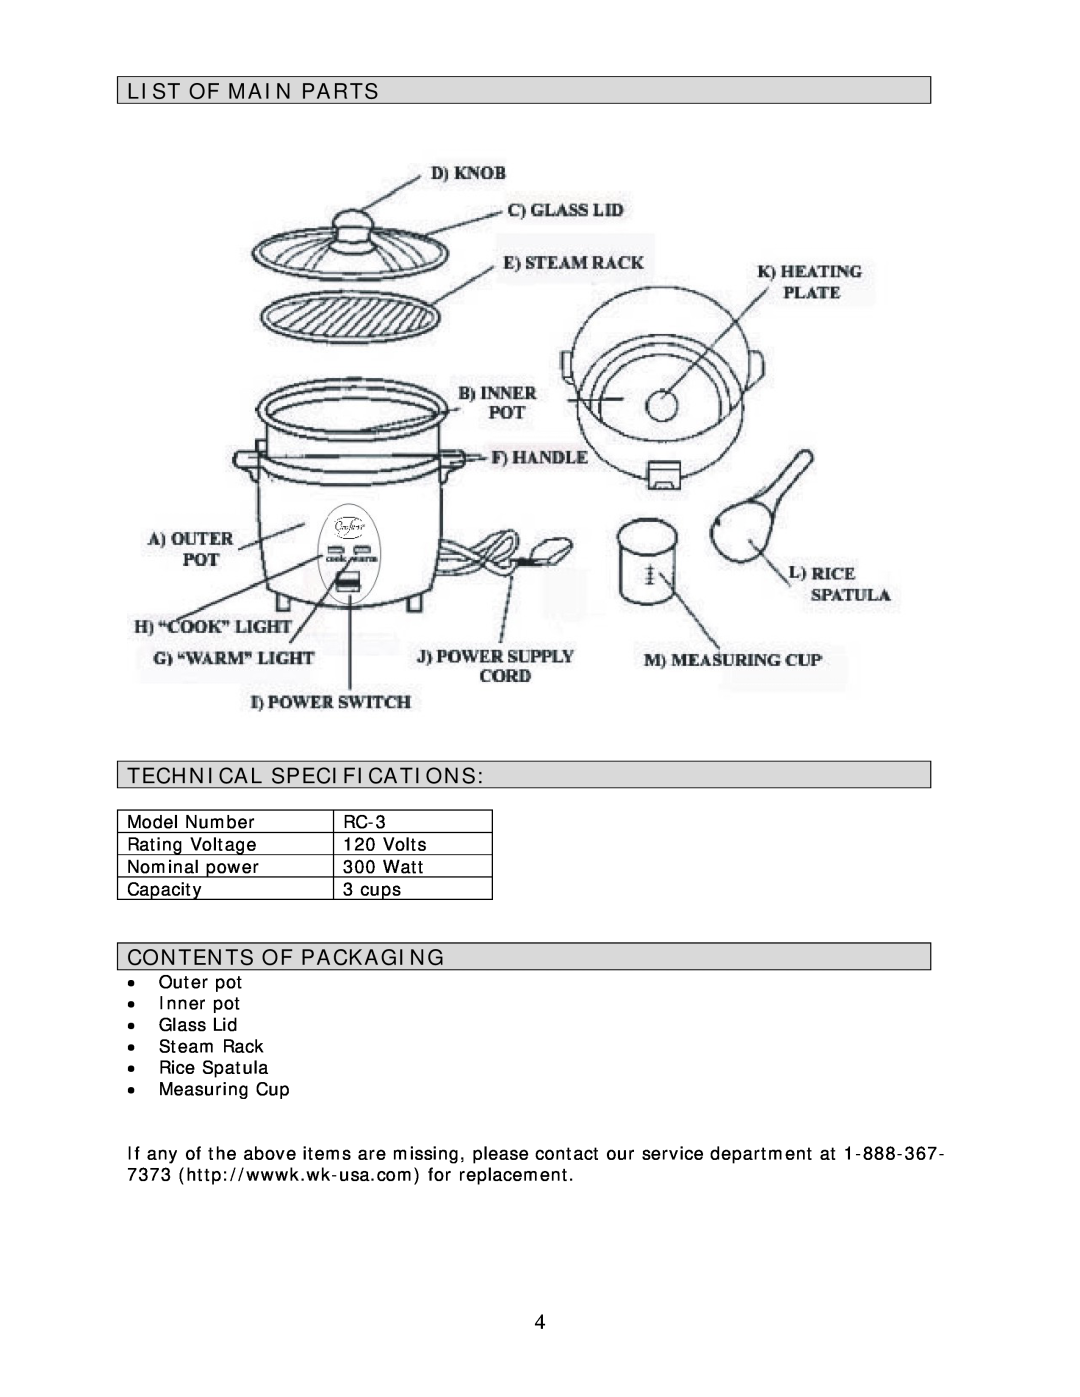 Wachsmuth & Krogmann RC-3 manual List Of Main Parts Technical Specifications, Contents Of Packaging 